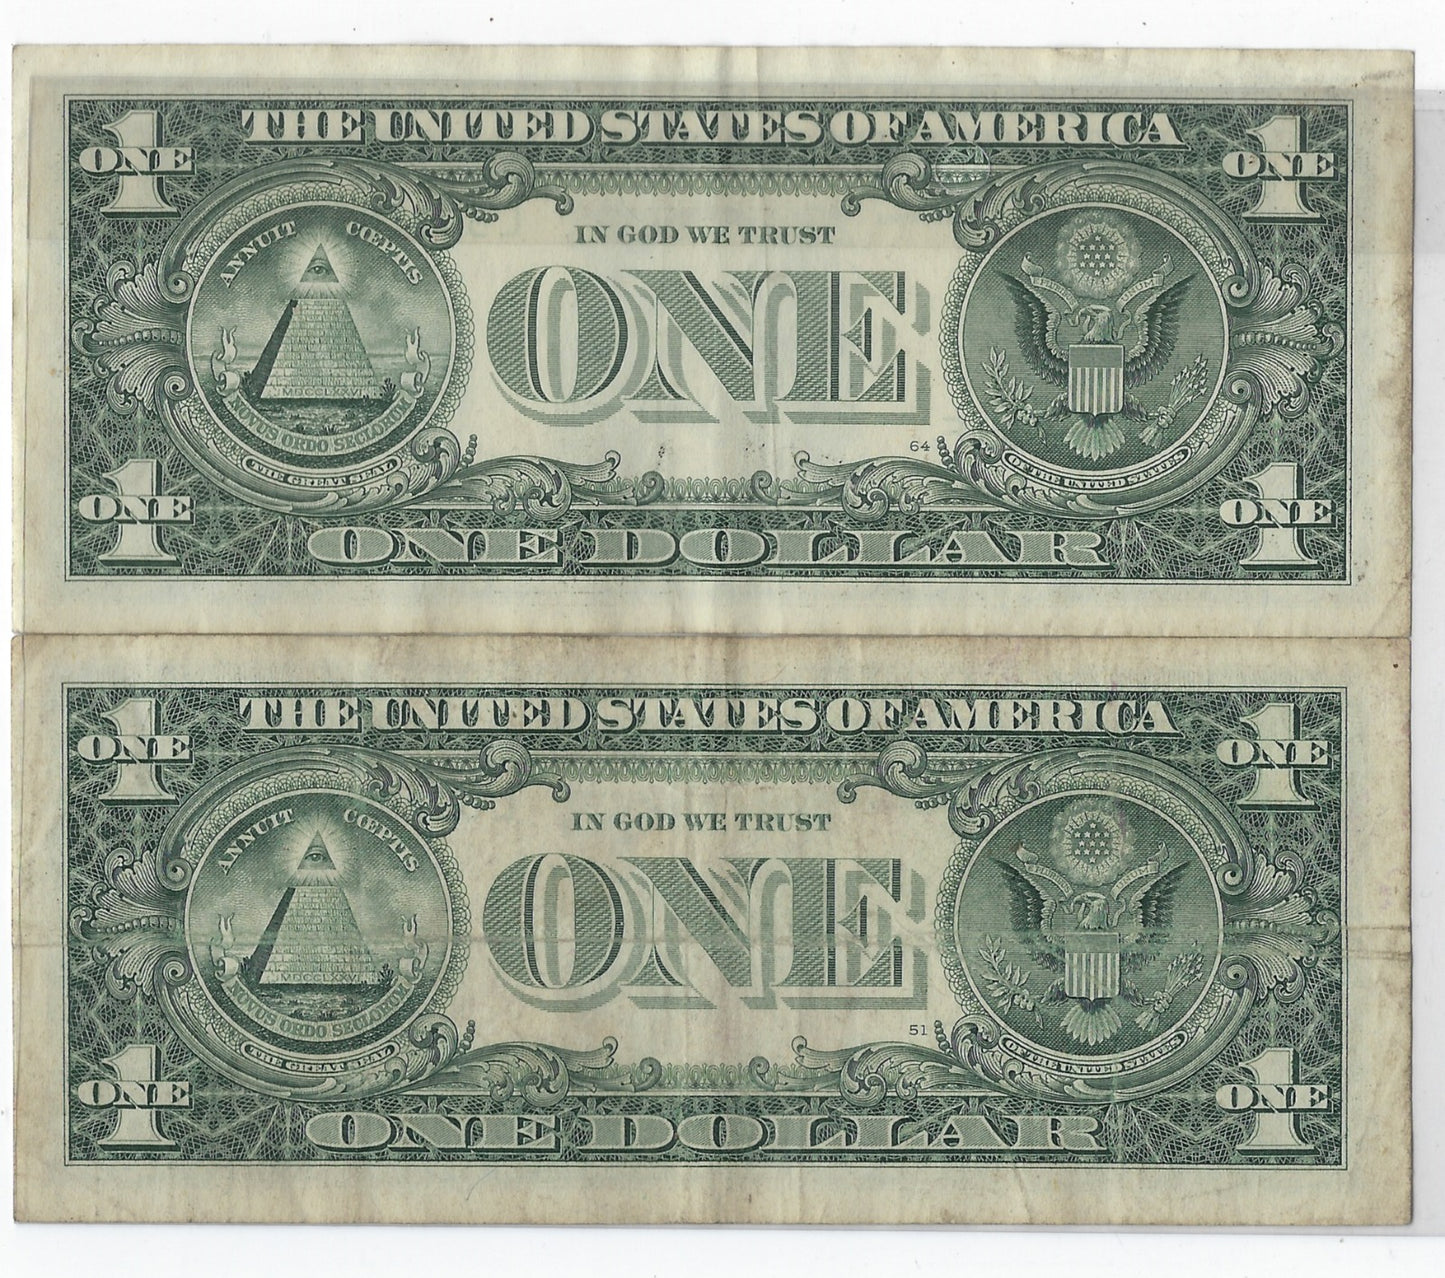 US$1 FRN San Francisco 12L Fancy SN Double Bookends x 2 ( 05------05 &50------50) VF + FREE Gift( READ more).FN204